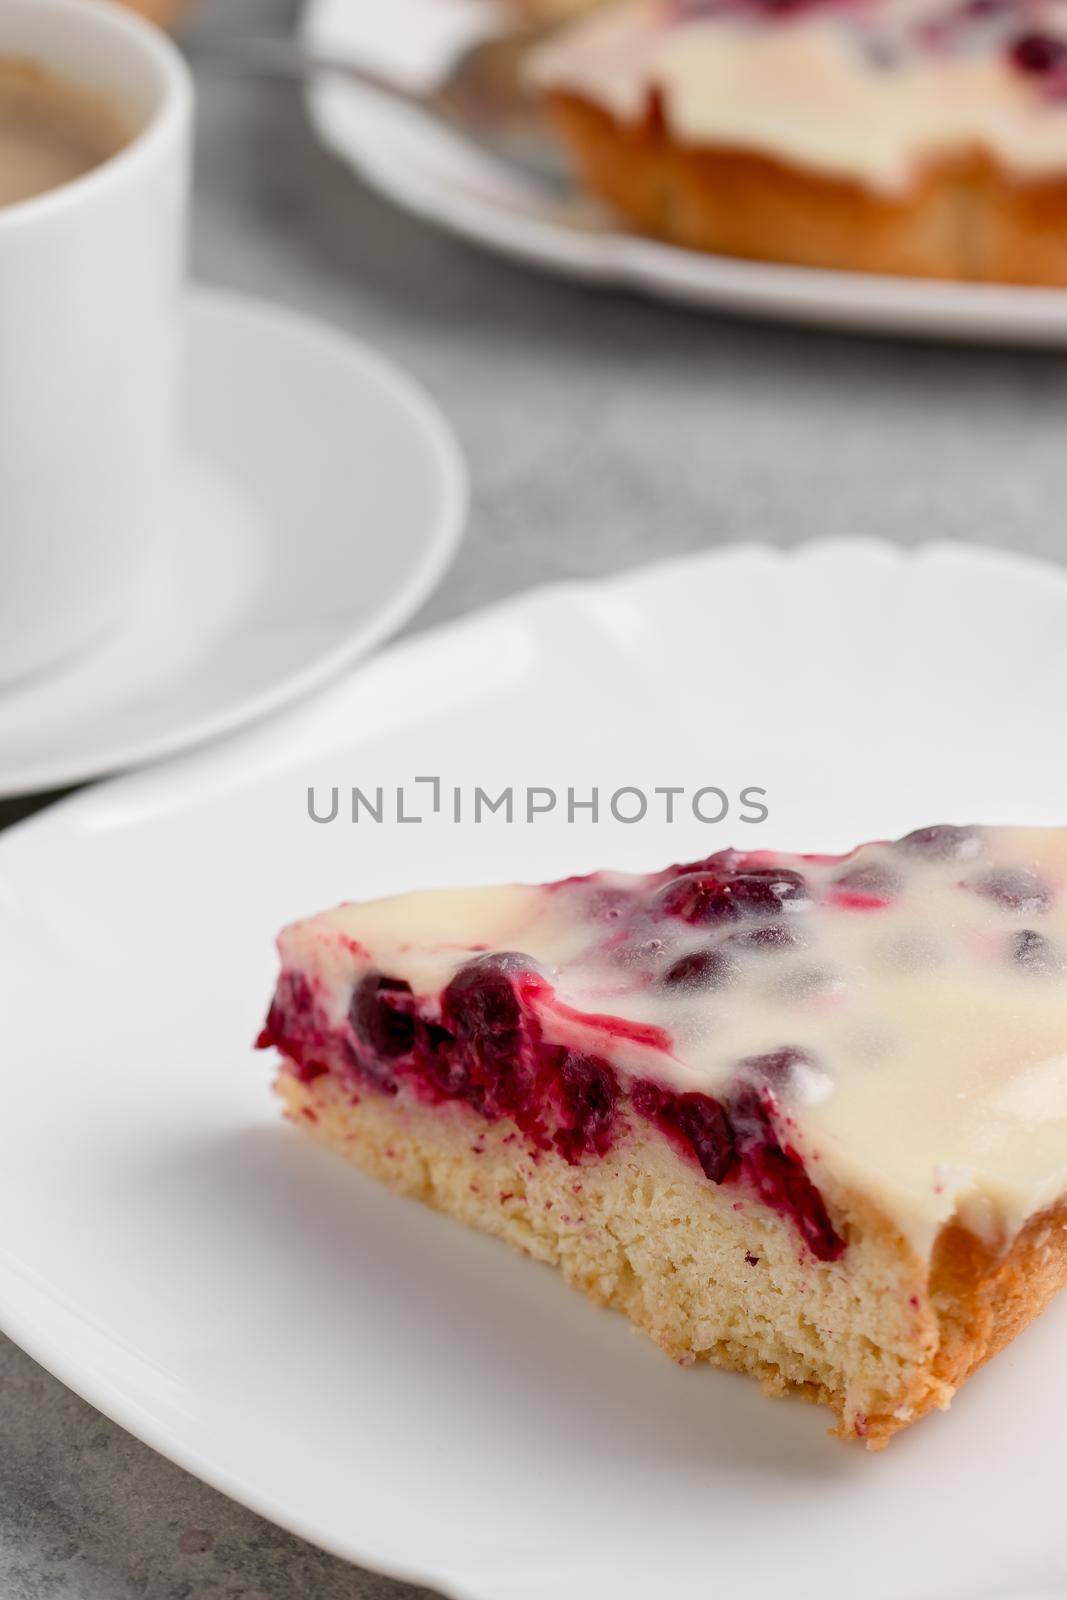 Homemade cake with cranberries and sour cream. Piece of pie close up. Vertical image.